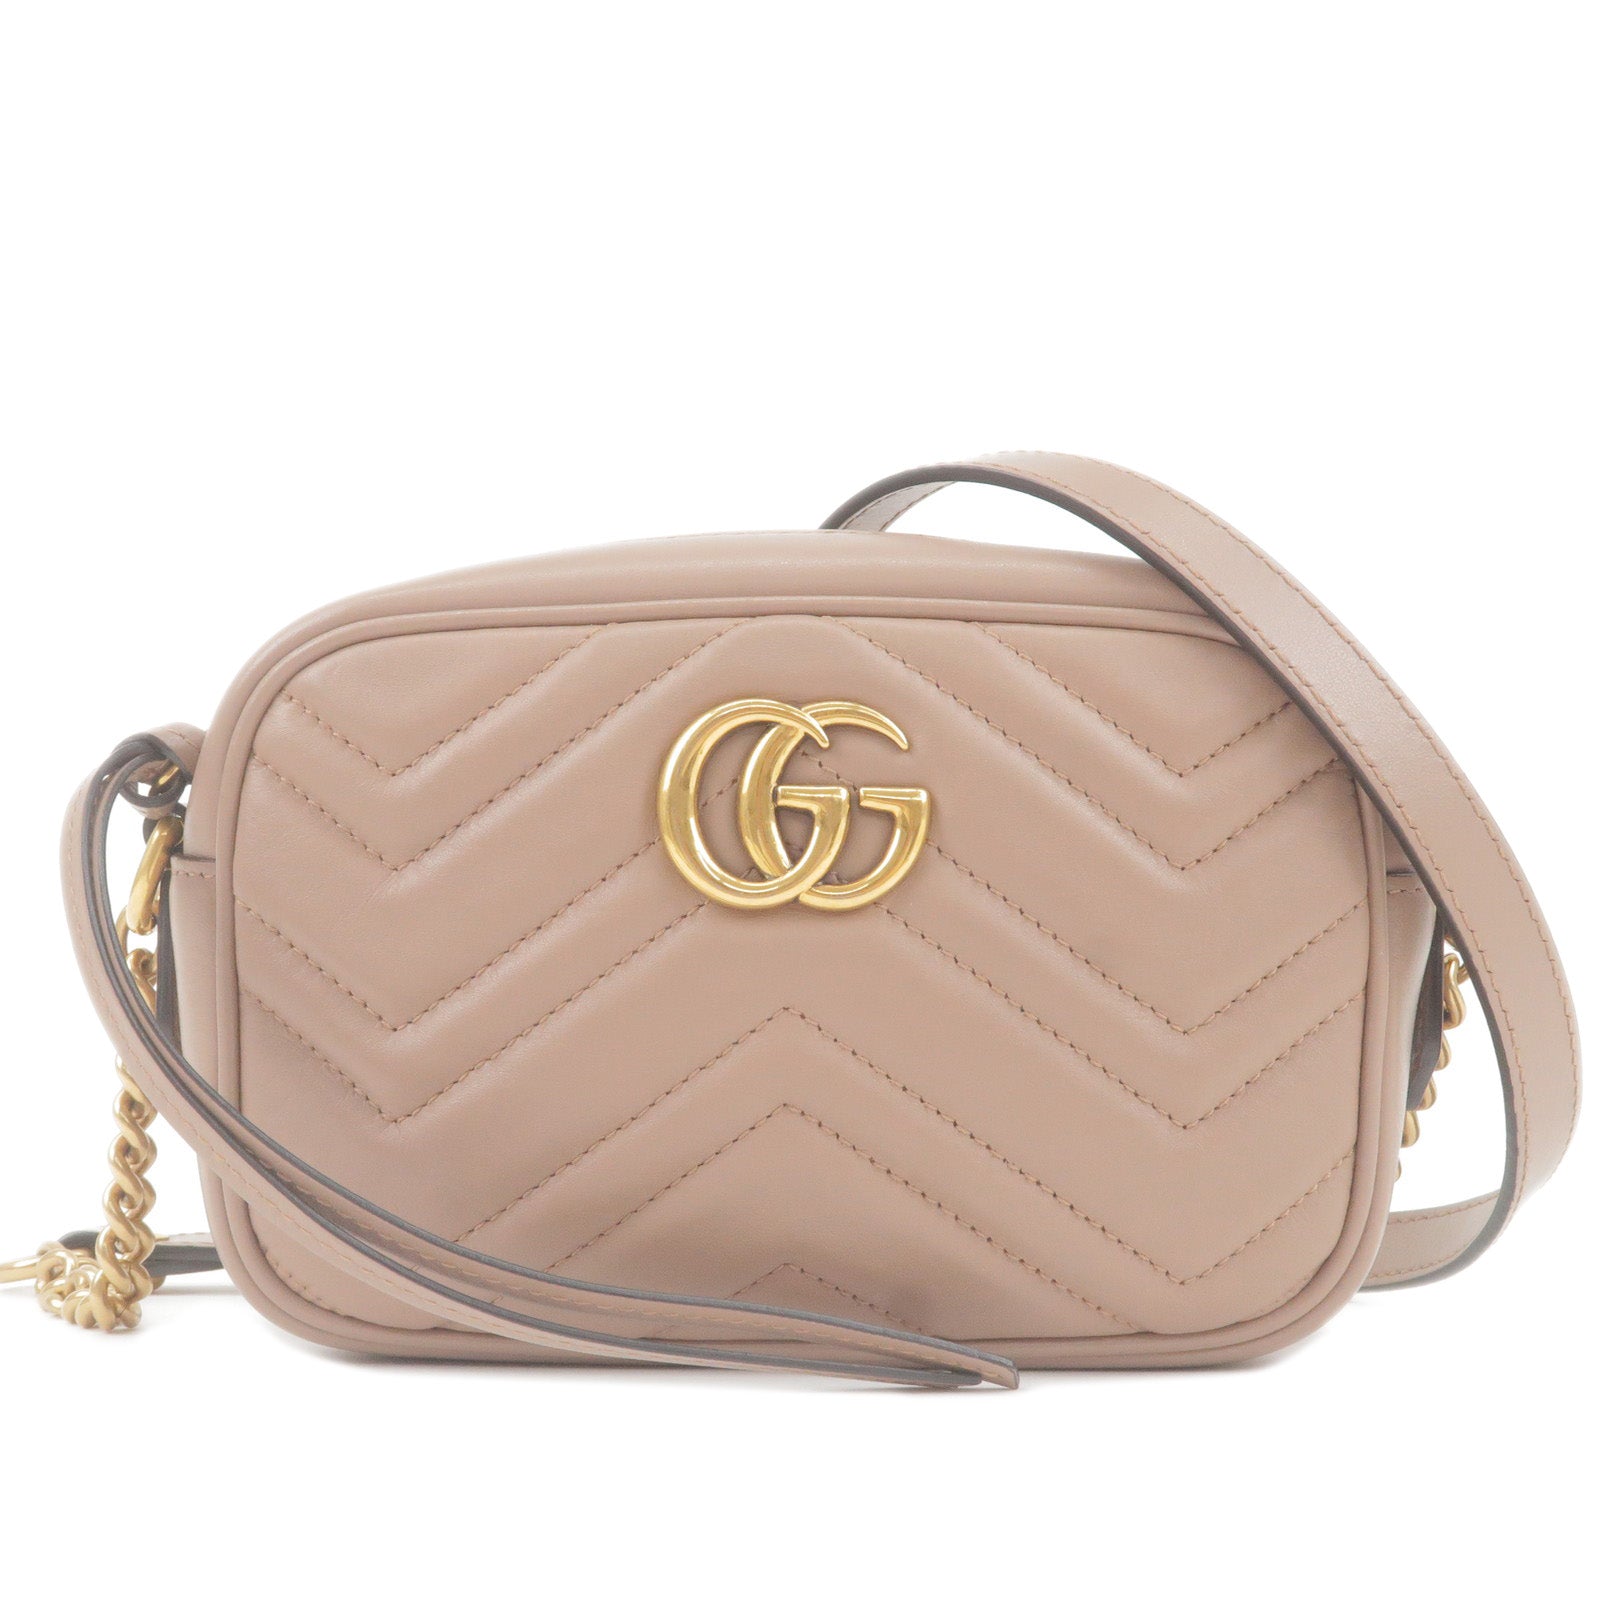 GUCCI-GG-Marmont-Leather-Chain-Shoulder-Bag-Pink-Beige-448065